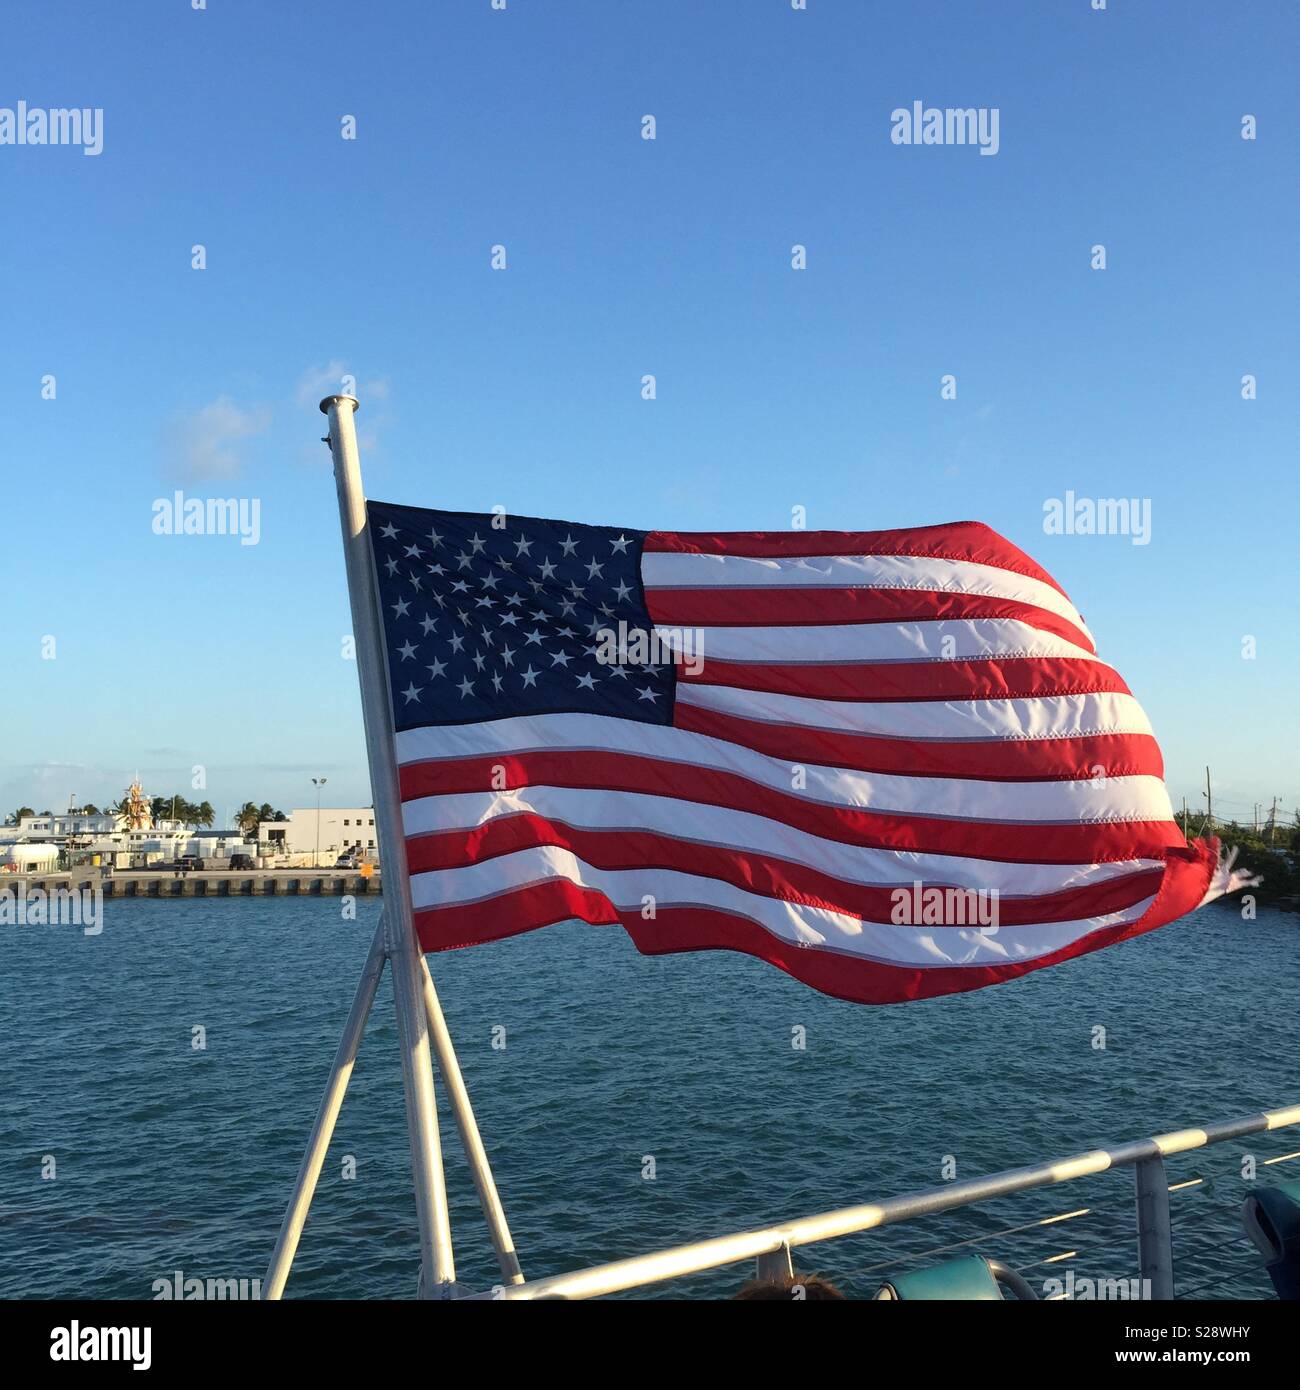 Key West, FL, USA. American flag flying on boat rail with view of Key West in background. Stock Photo